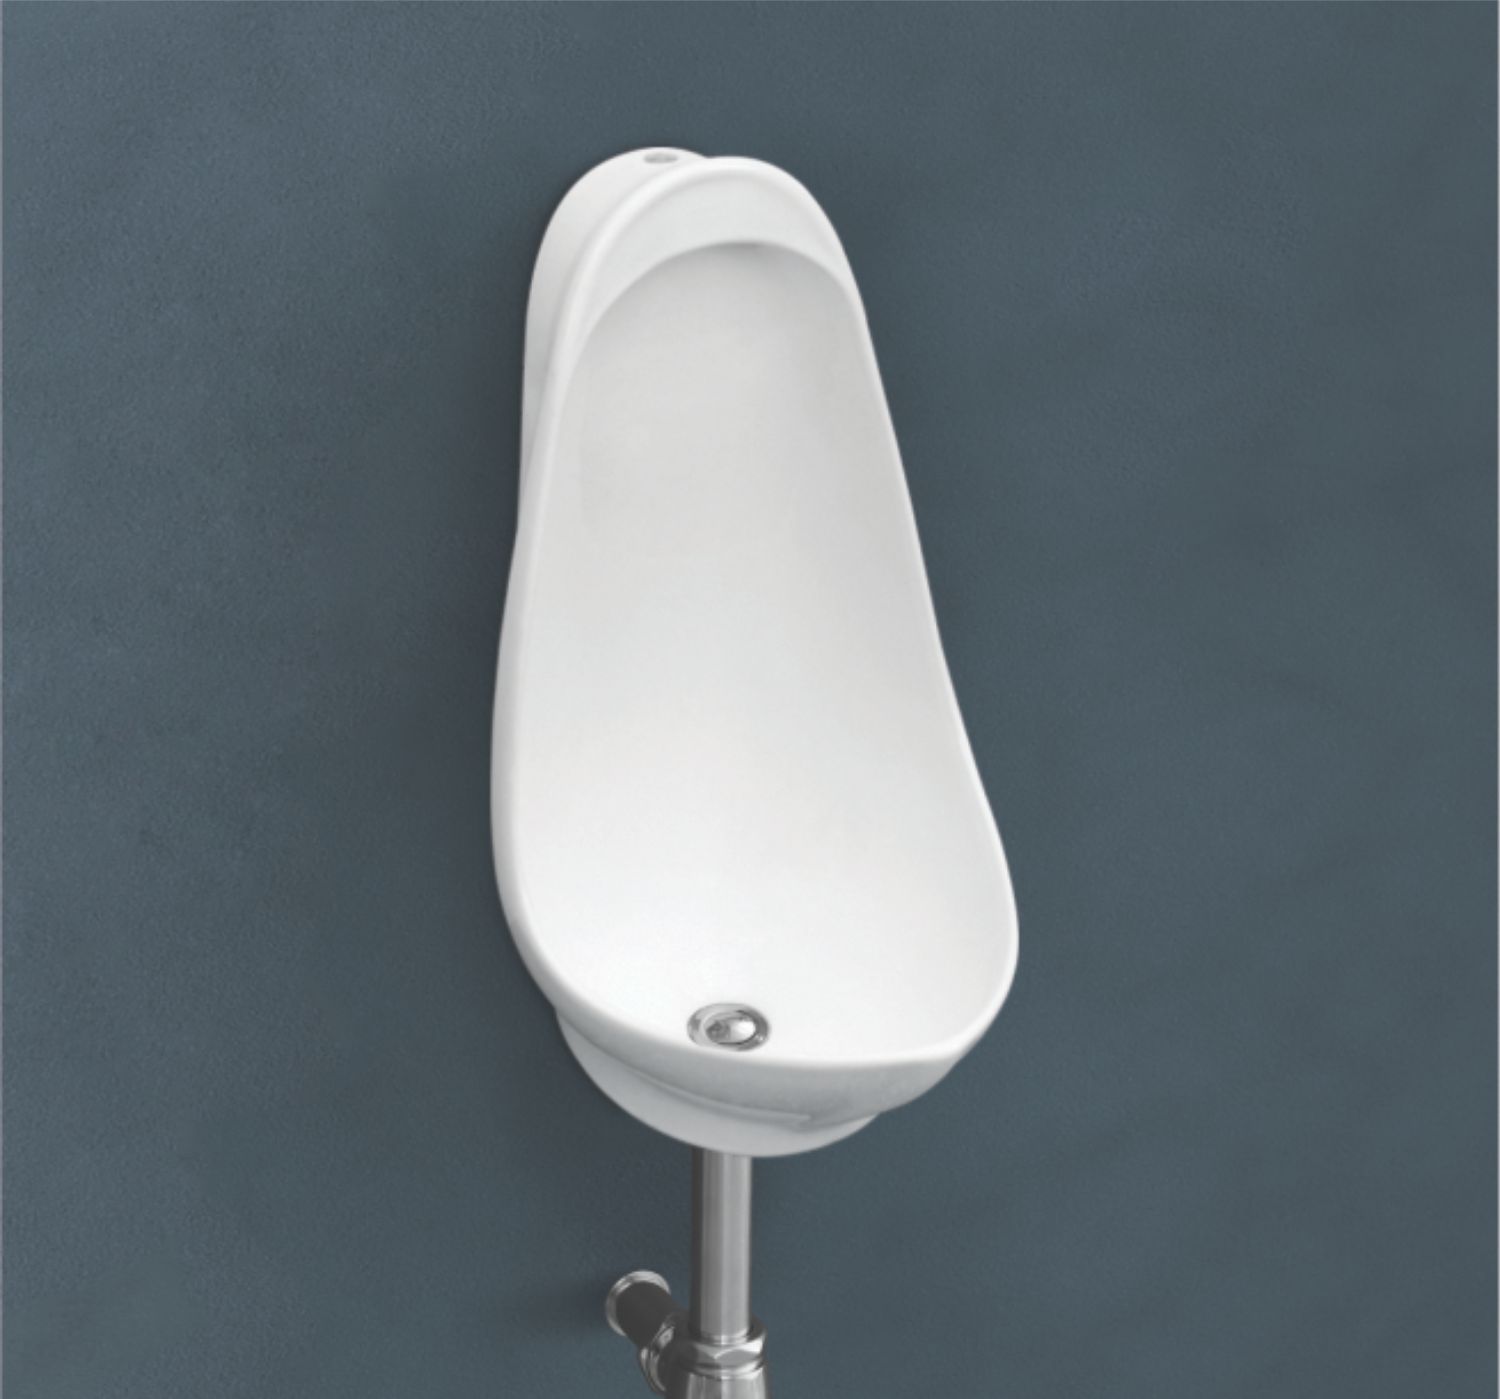 Cube Urinal Manufacturer and Supplier